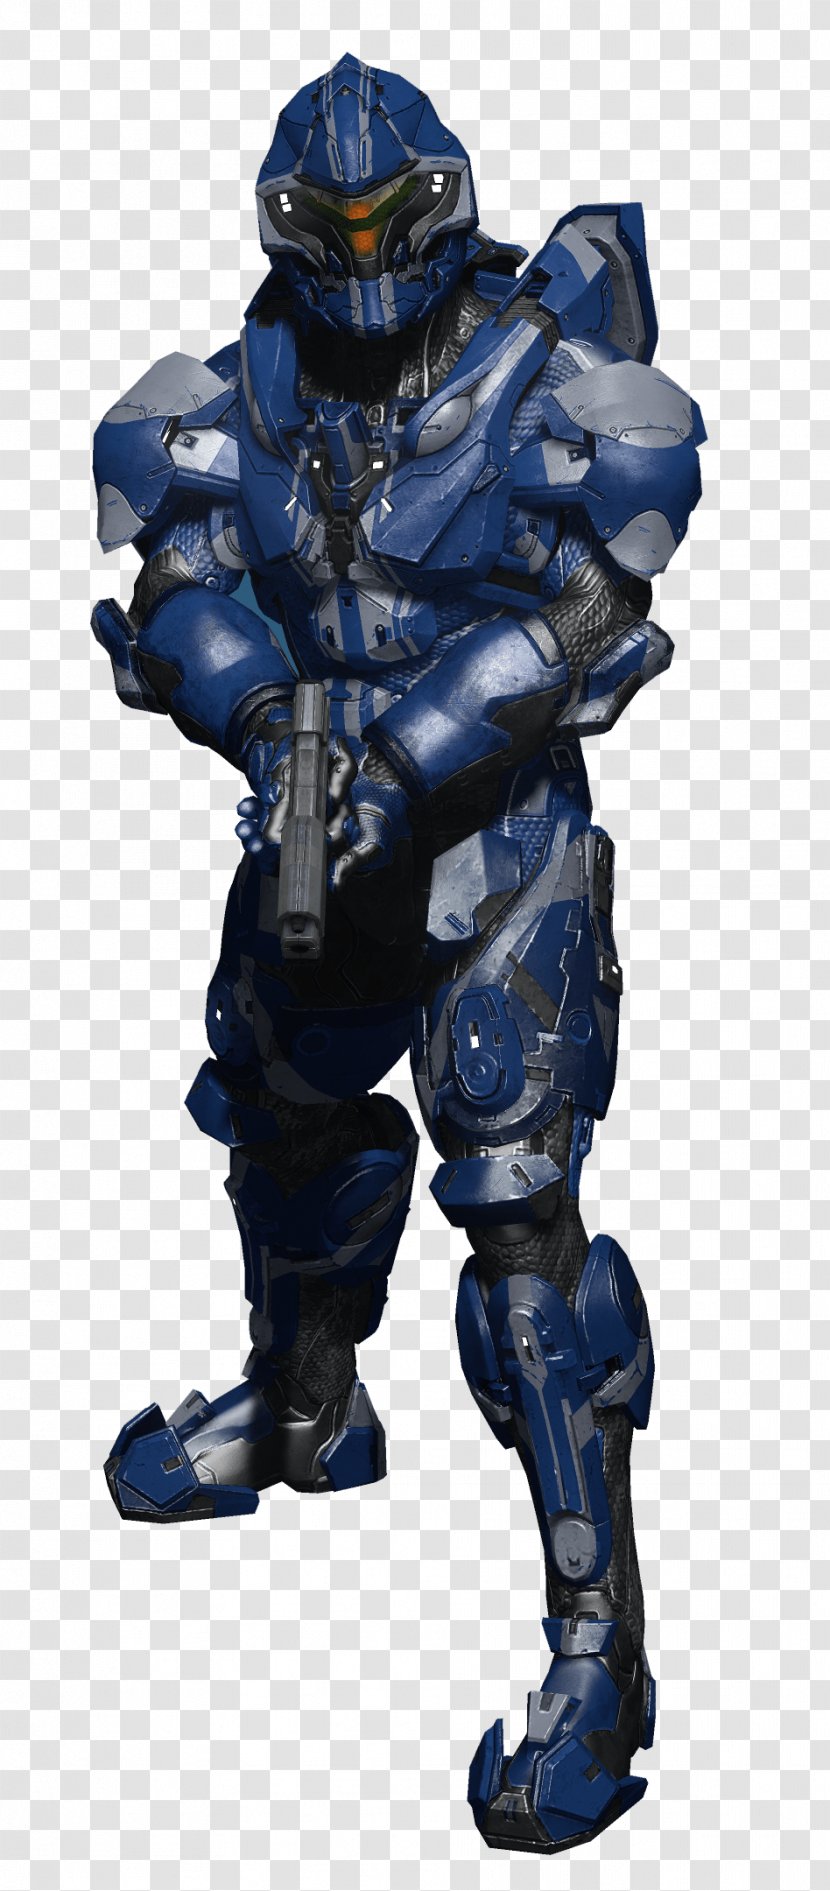 Halo 4 Halo: Reach 5: Guardians Spartan Assault Pathfinder Roleplaying Game Transparent PNG